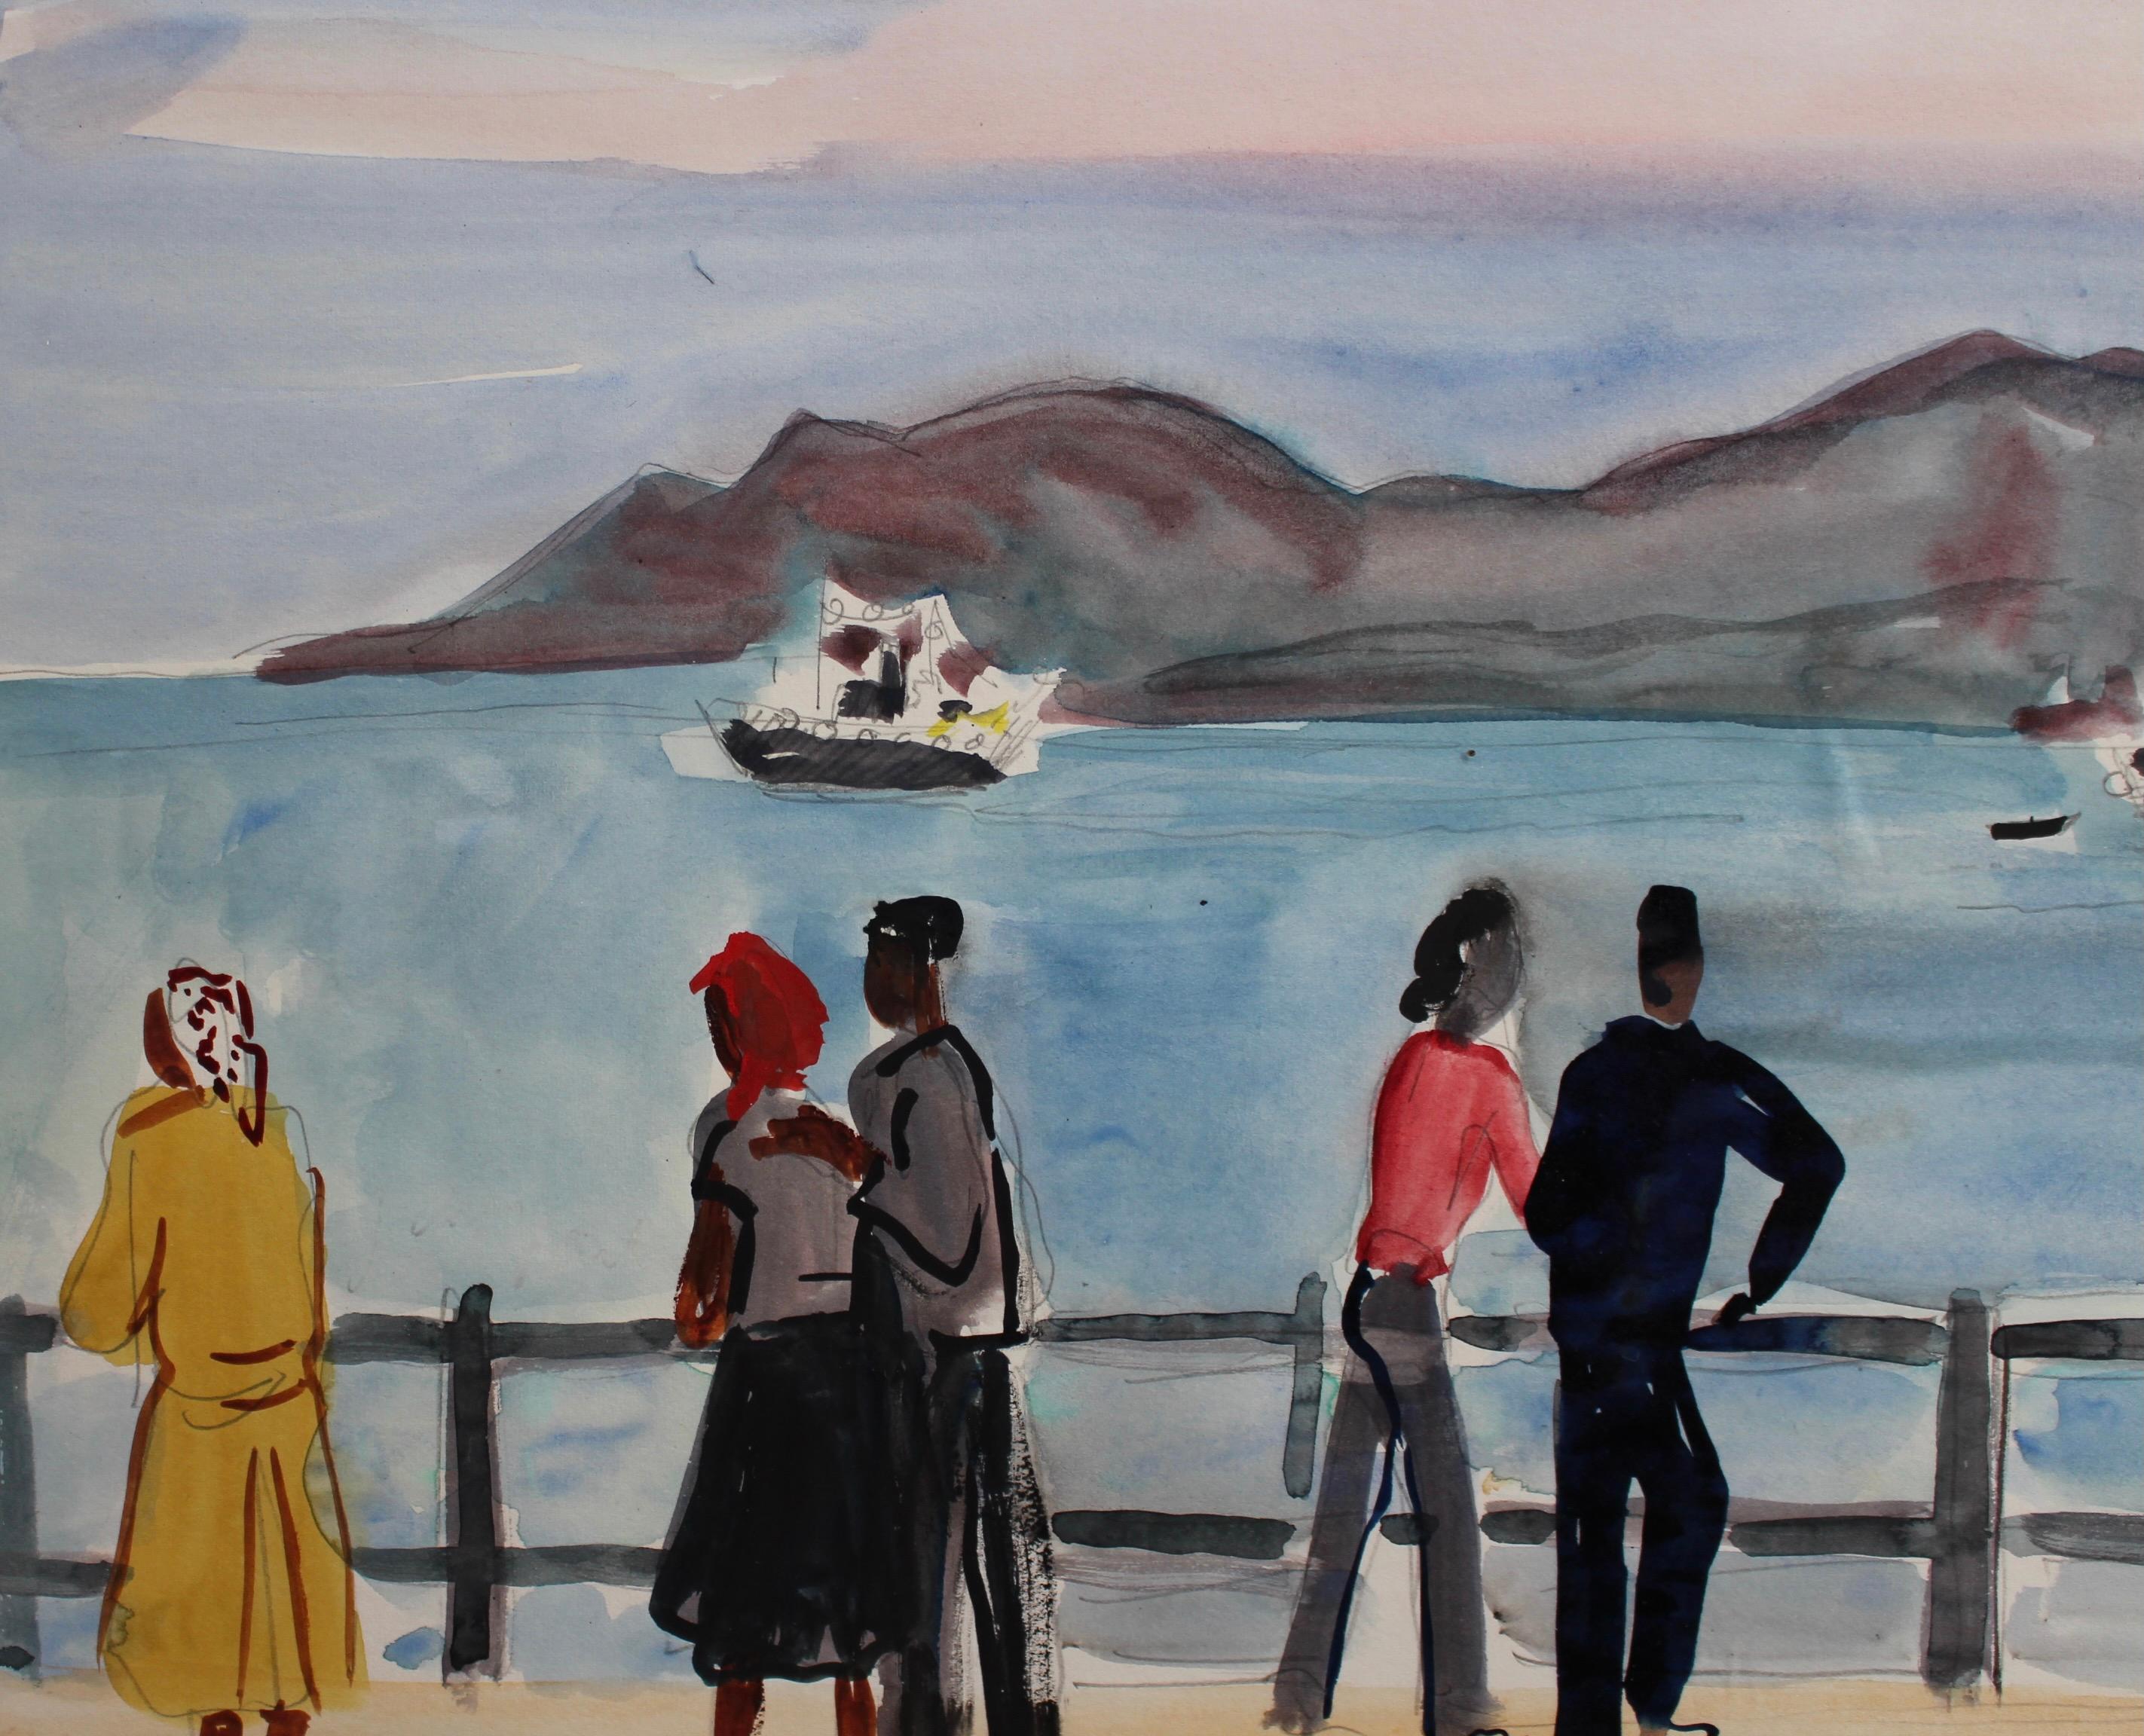 'Seaside Strollers in Cannes', watercolour on art paper, by Yves Brayer (circa 1970s). Even when not in summertime, passers-by and flâneurs in Cannes will find purpose and joy along the promenades of the azure Mediterranean coast. The blues of the